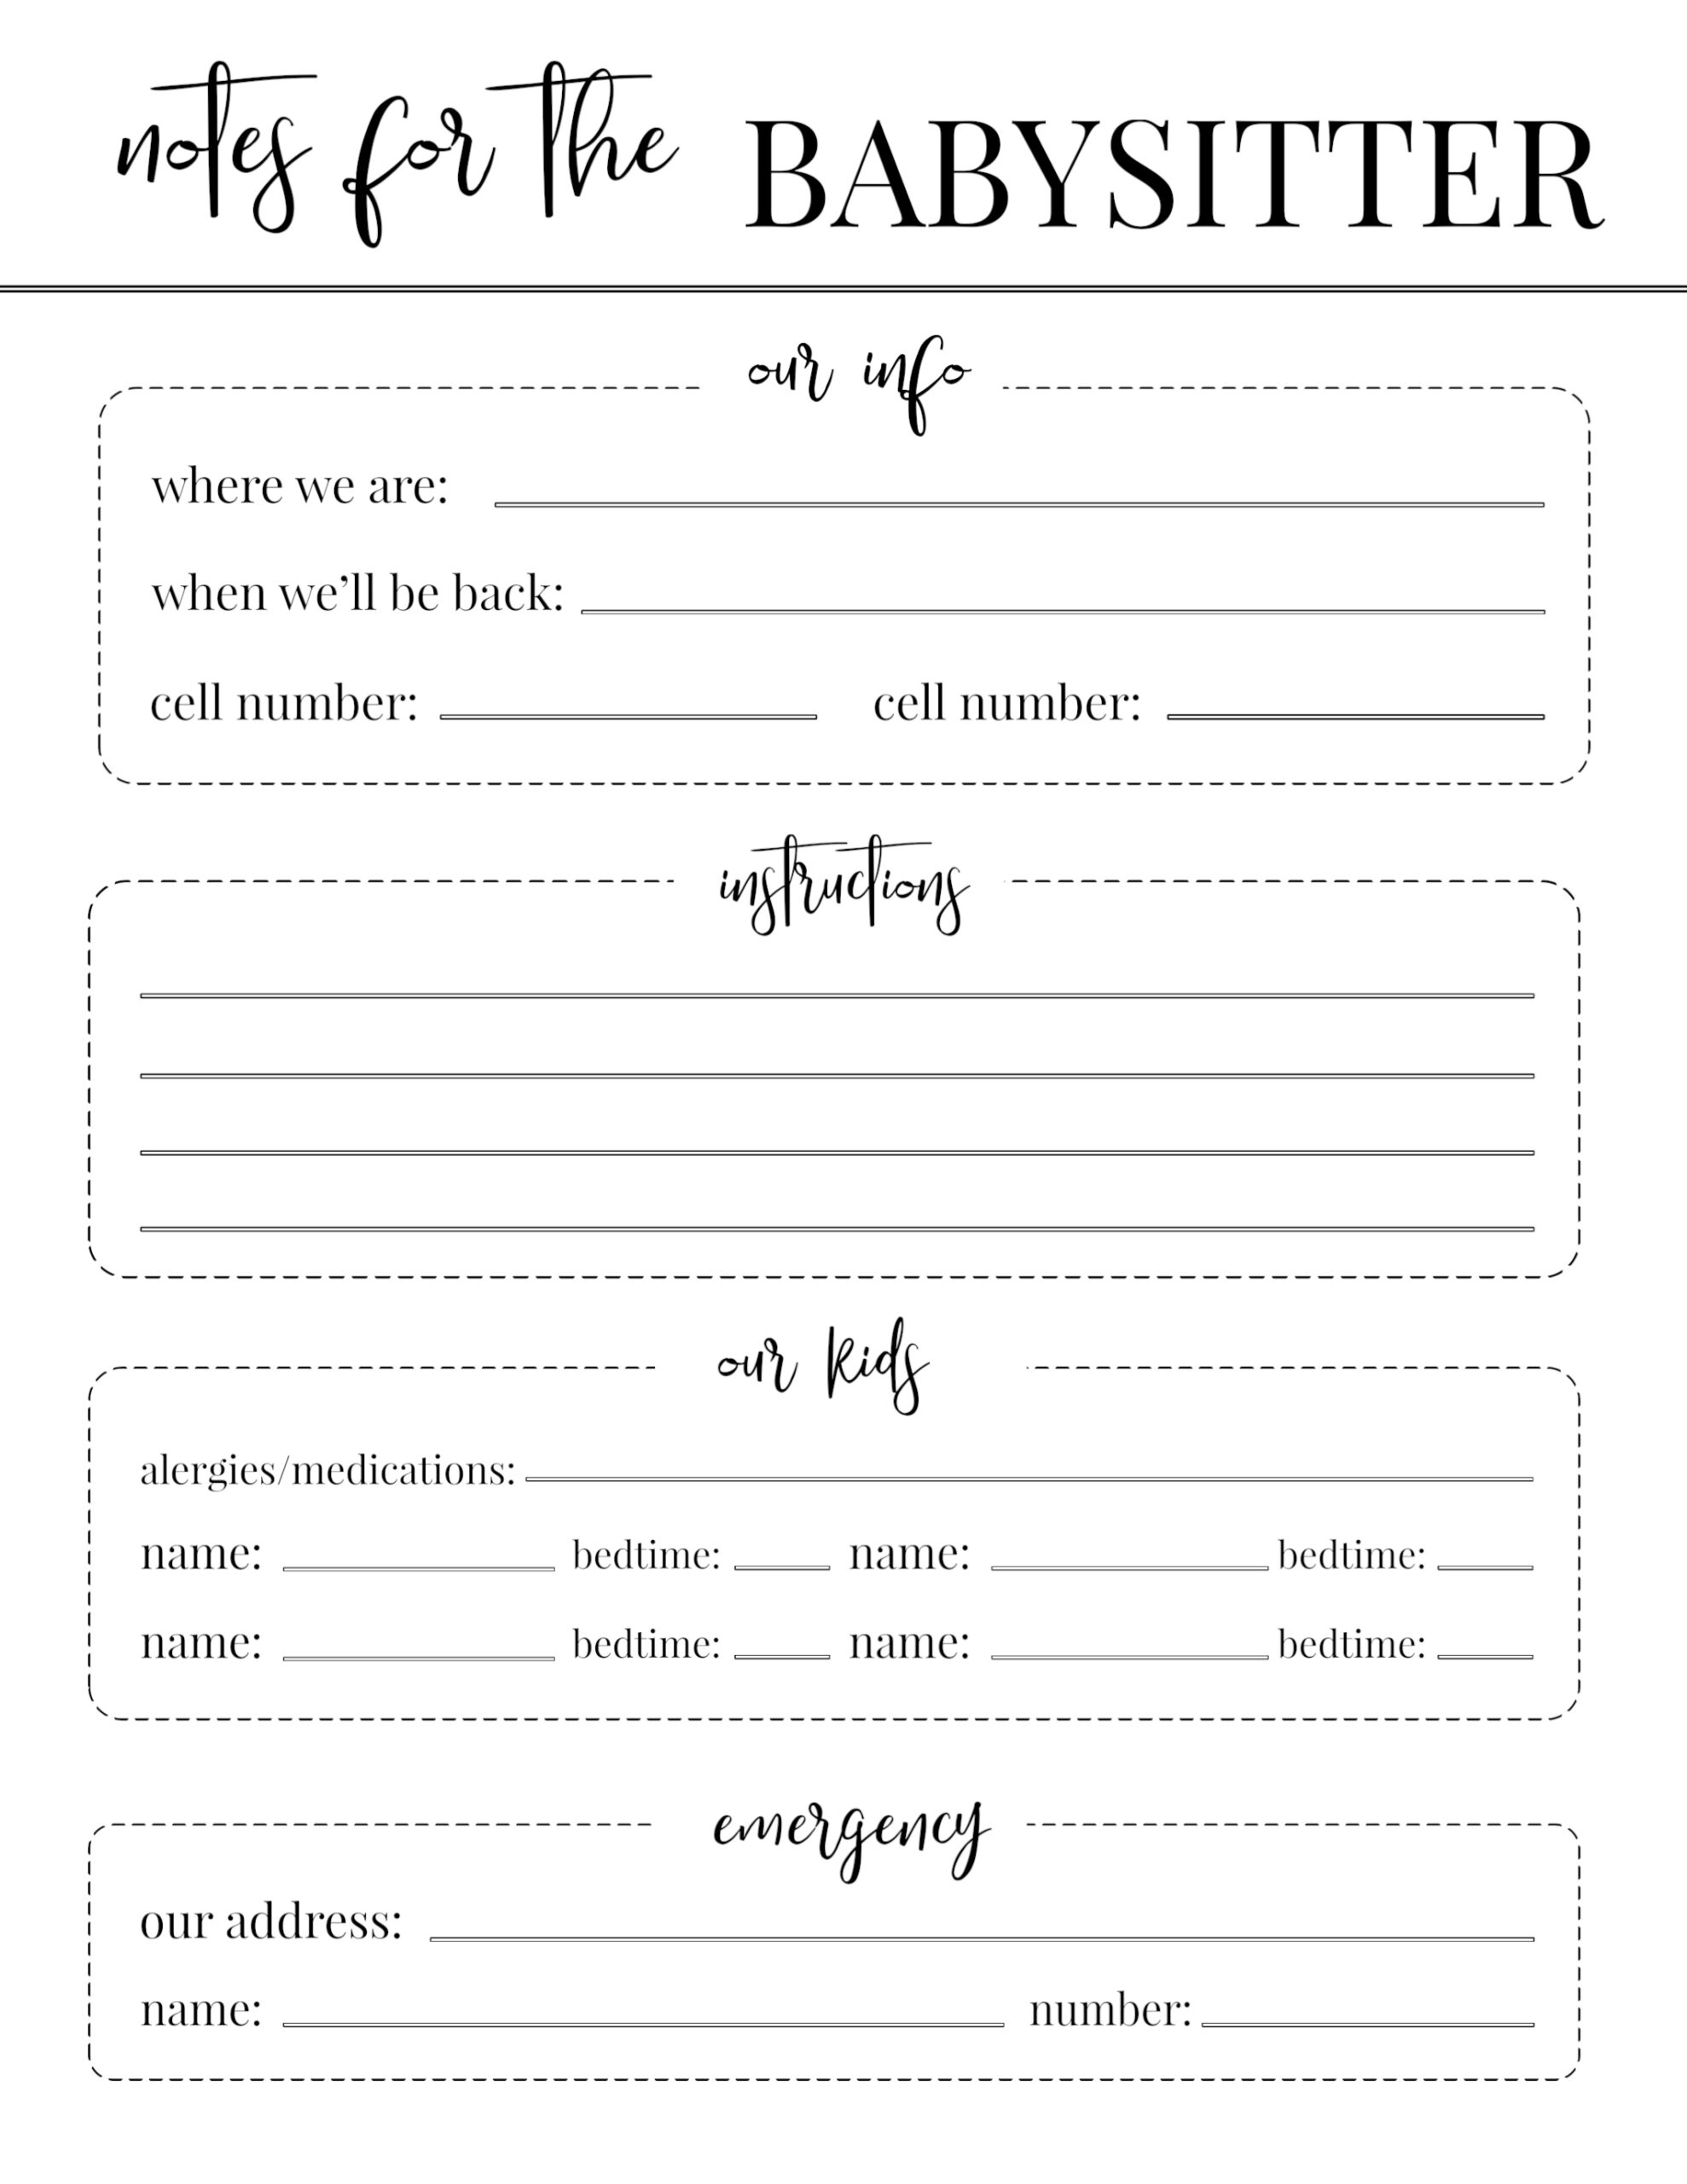 Free Printable Babysitter Notes Template - Paper Trail Design pertaining to Babysitter Notes Free Printable